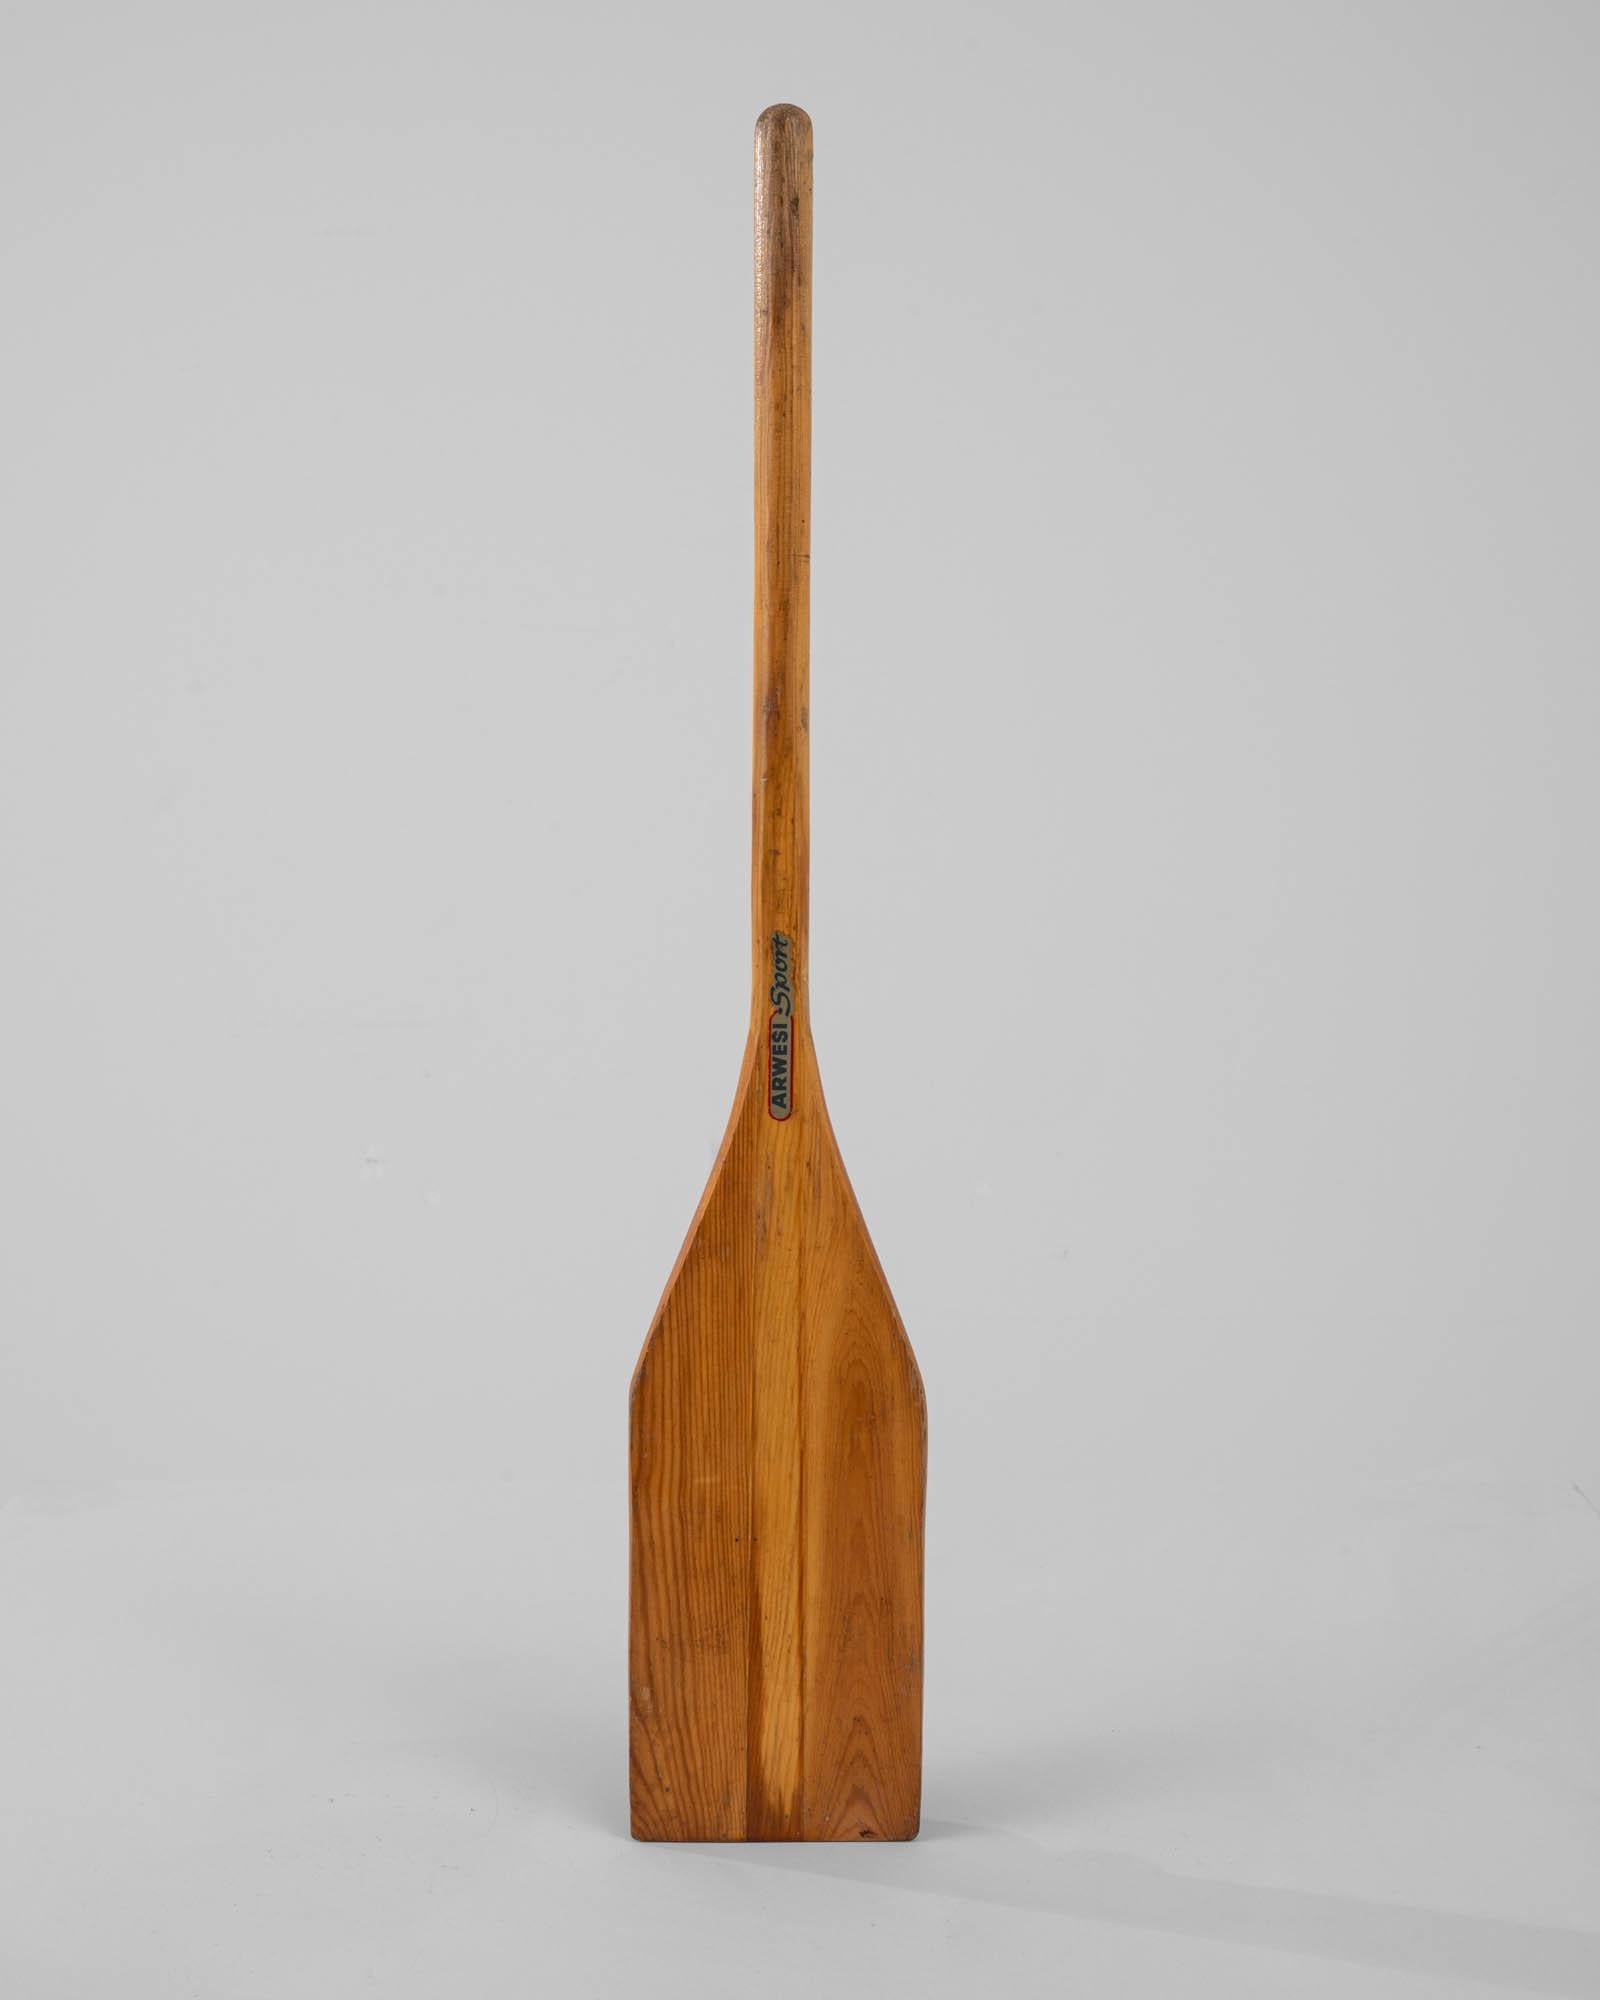 This wooden boat oar was made in 20th Century Germany. The polished wood has a smooth finish with a light multi-toned auburn brown shaft. Perfect for hanging on the wall, oars will complete a beach house or impart the charm of an idyllic lake to any